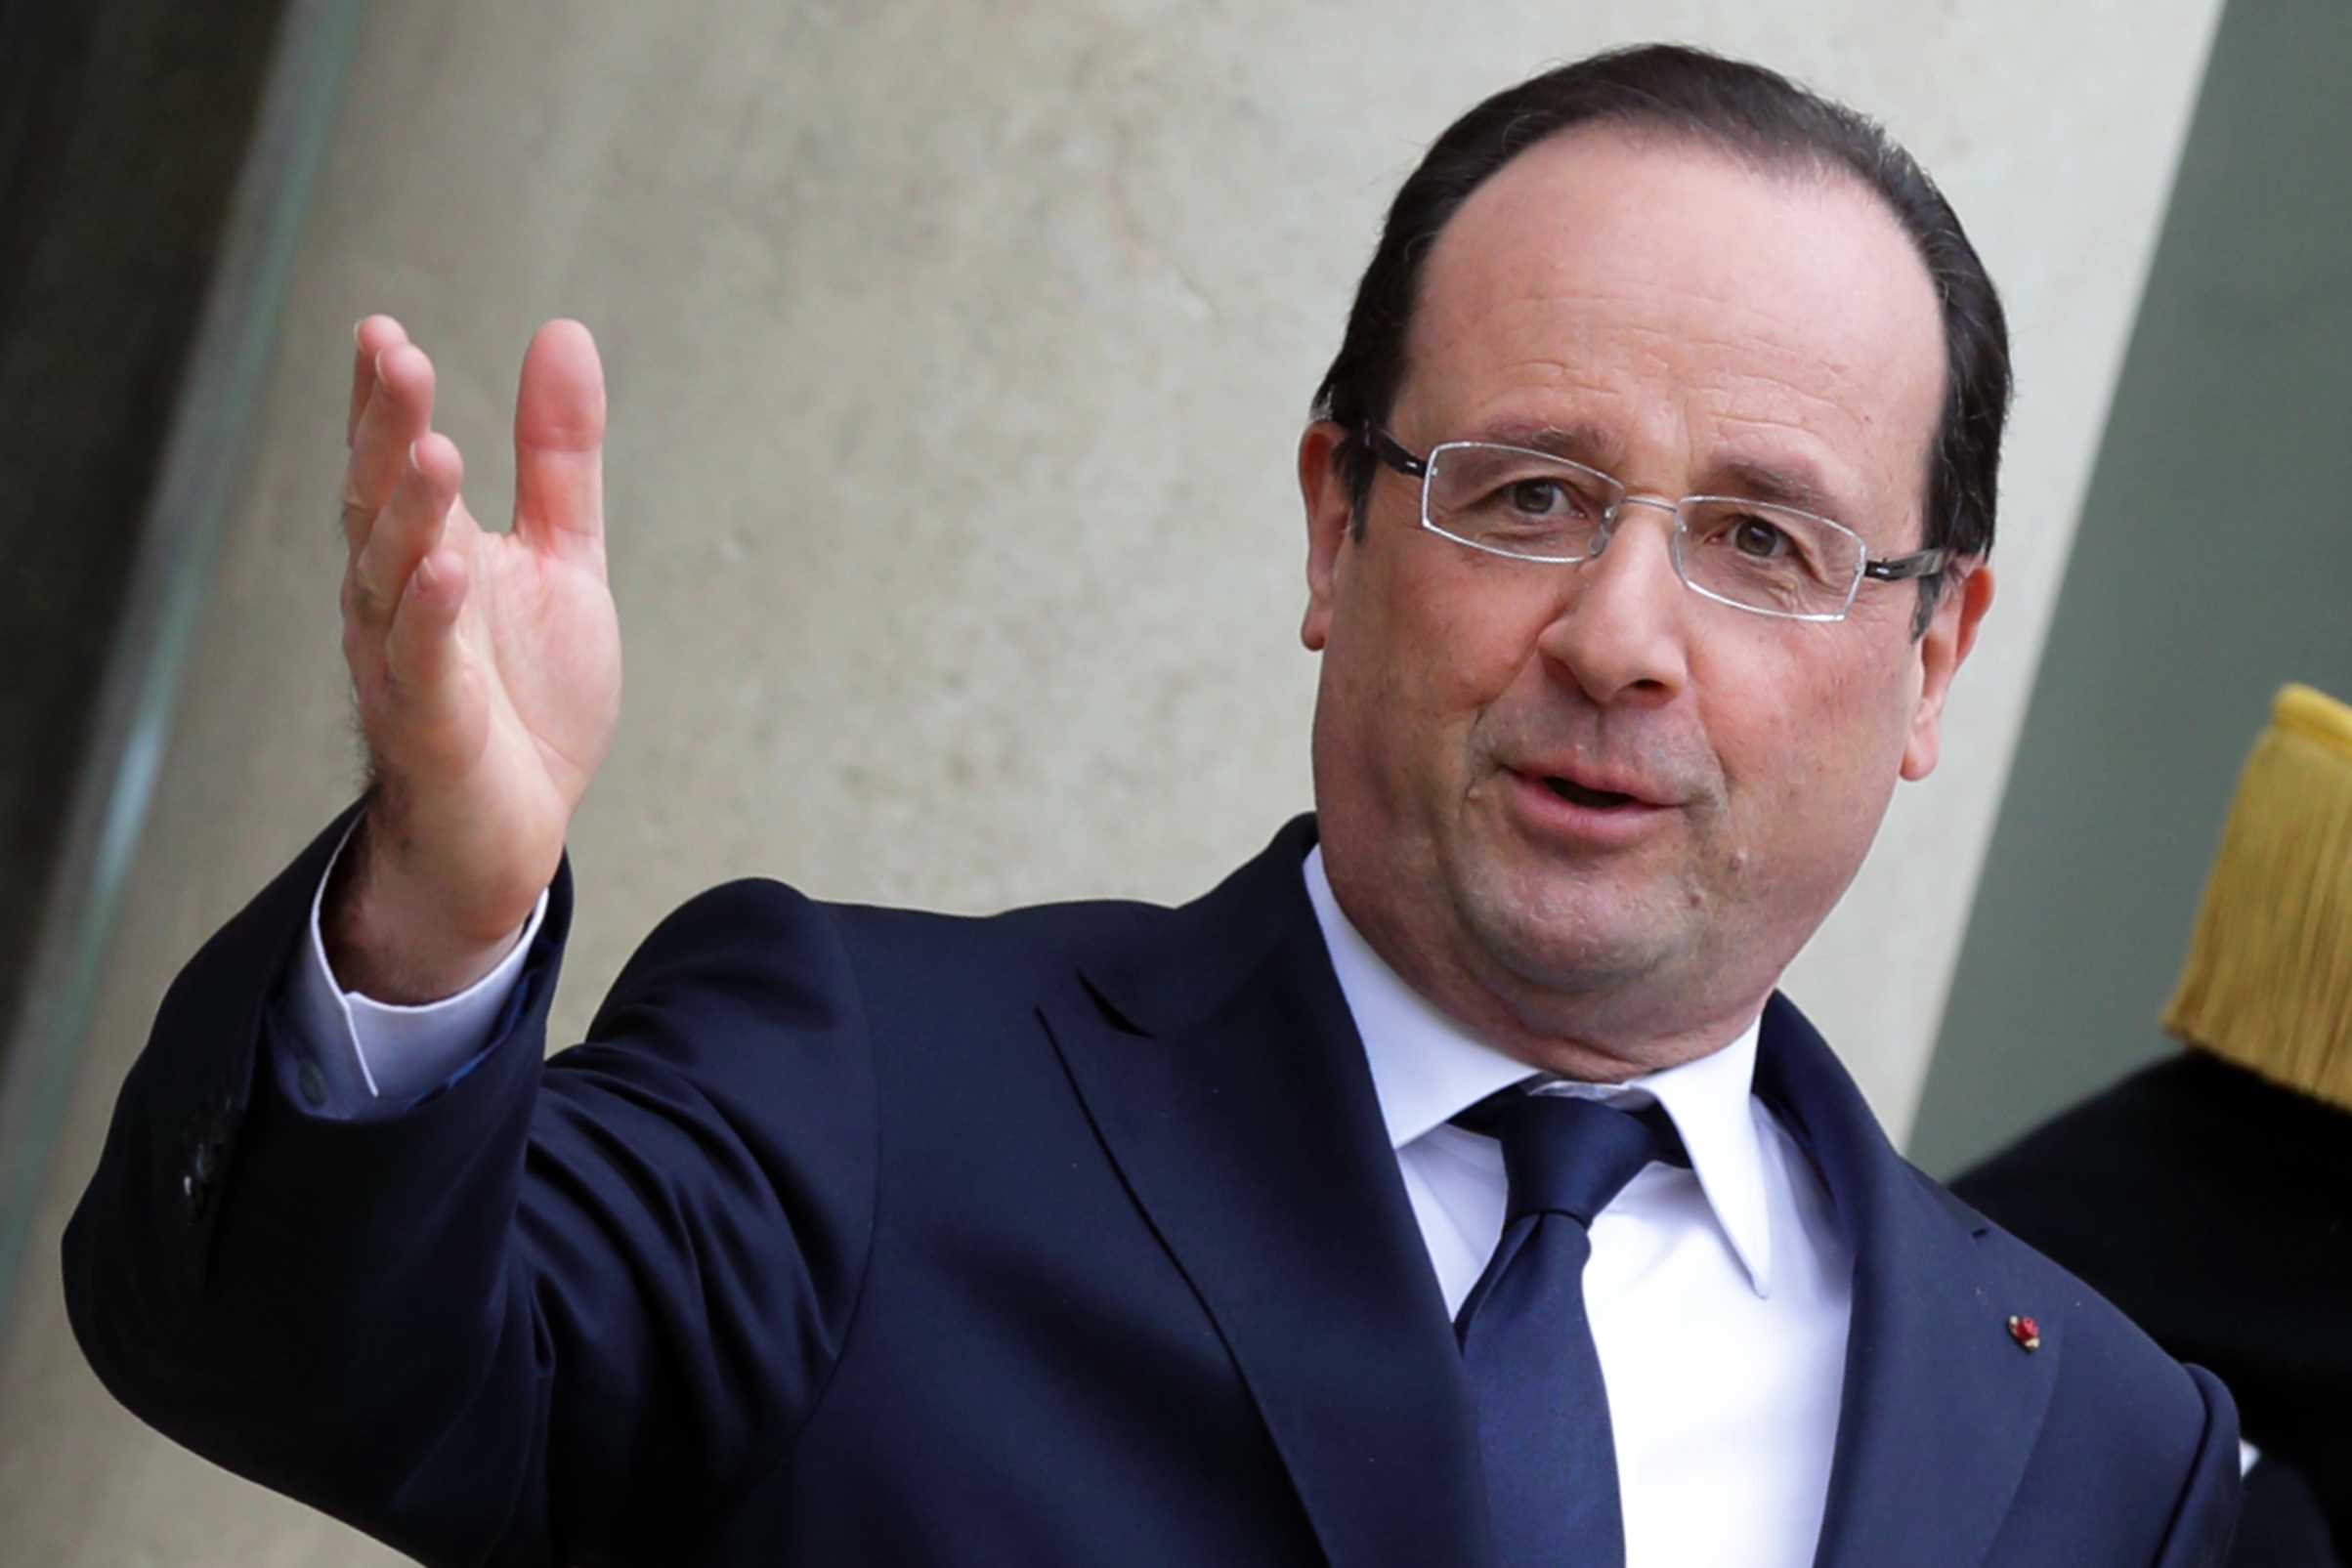 French President Francois Hollande stands on the steps of the Elysee Palace in Paris